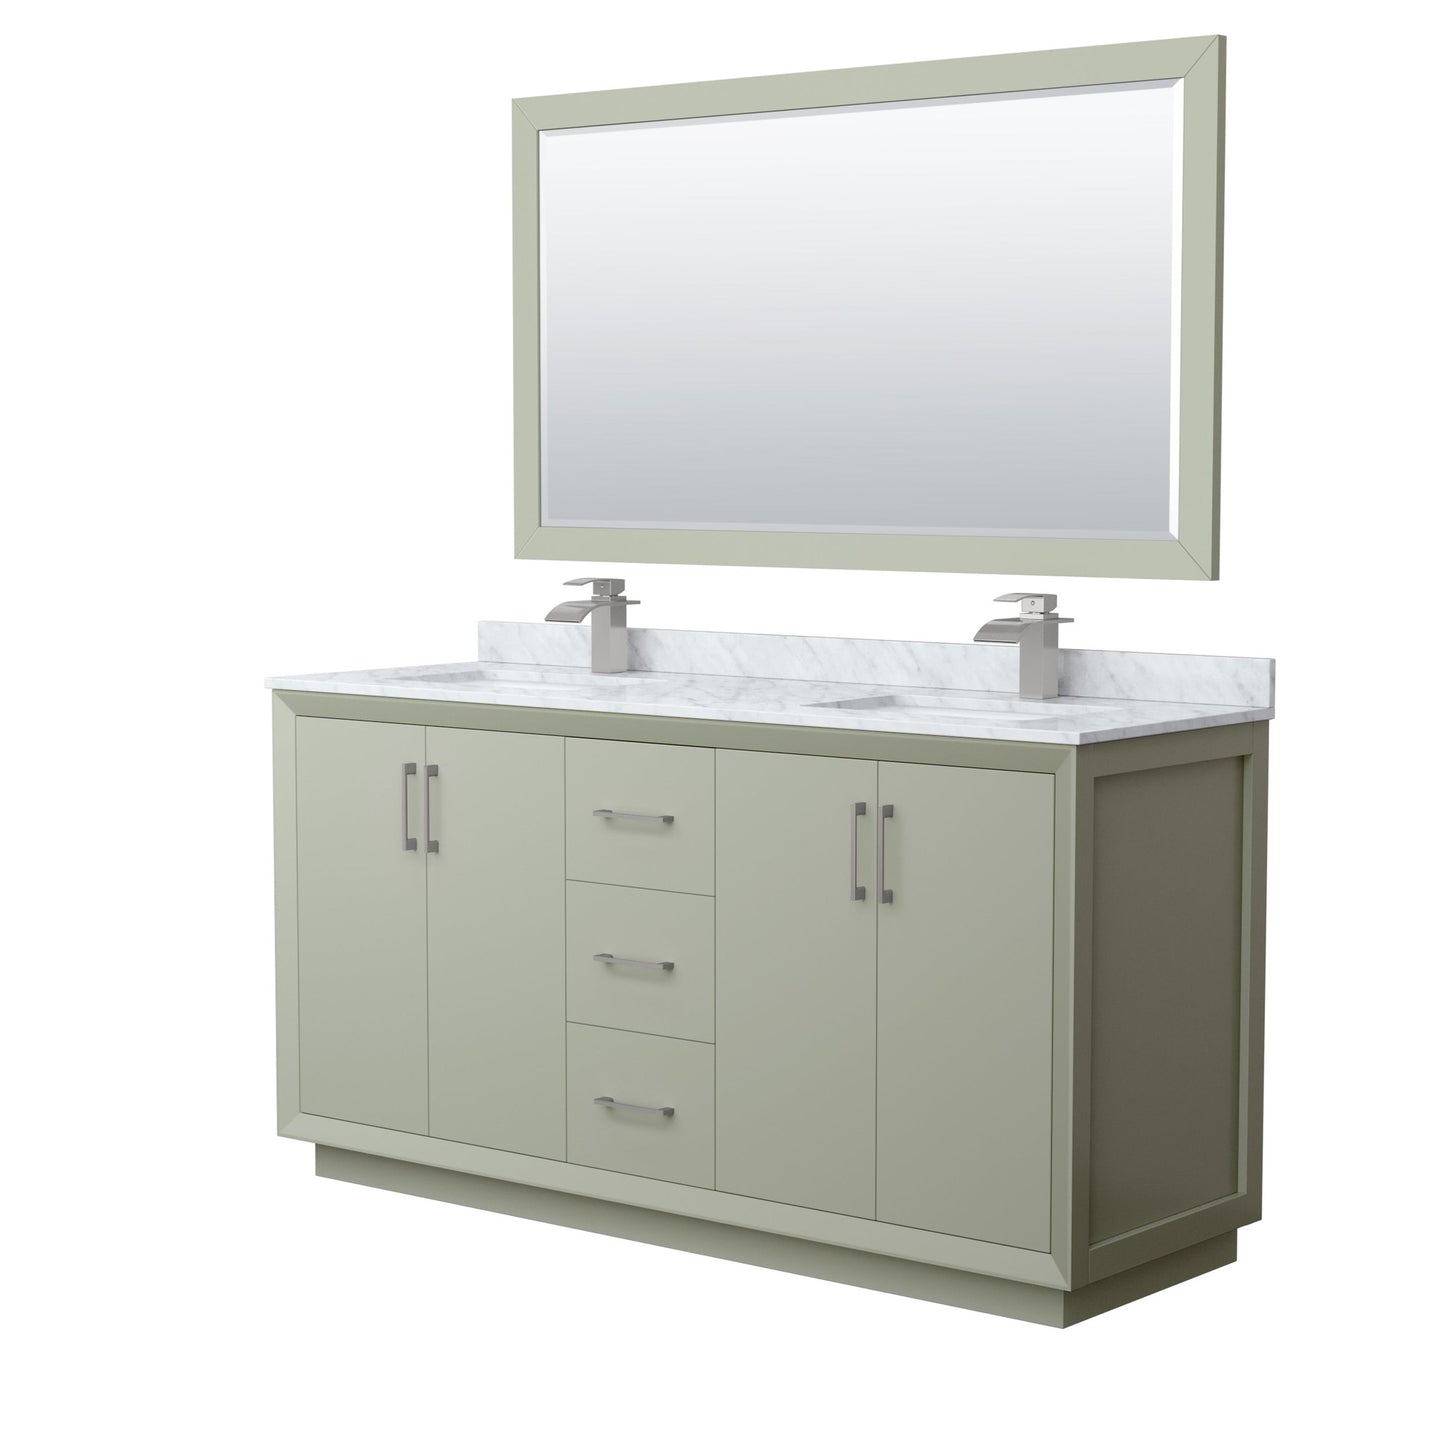 Wyndham Collection Strada 66" Double Bathroom Vanity in Light Green, White Carrara Marble Countertop, Undermount Square Sinks, Brushed Nickel Trim, 58" Mirror